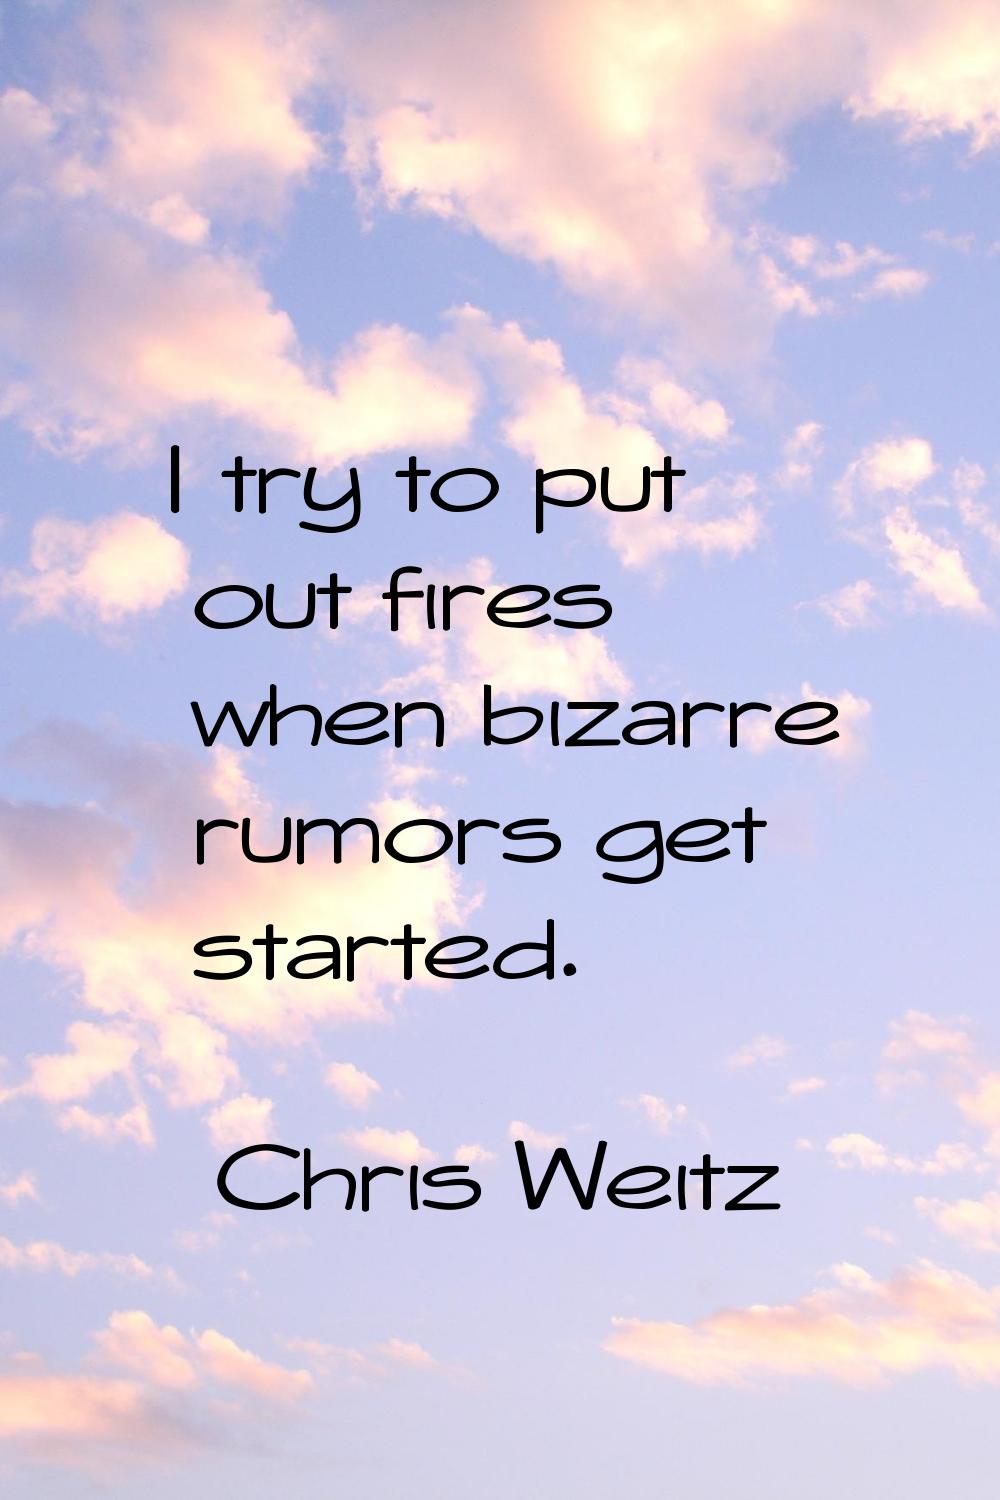 I try to put out fires when bizarre rumors get started.